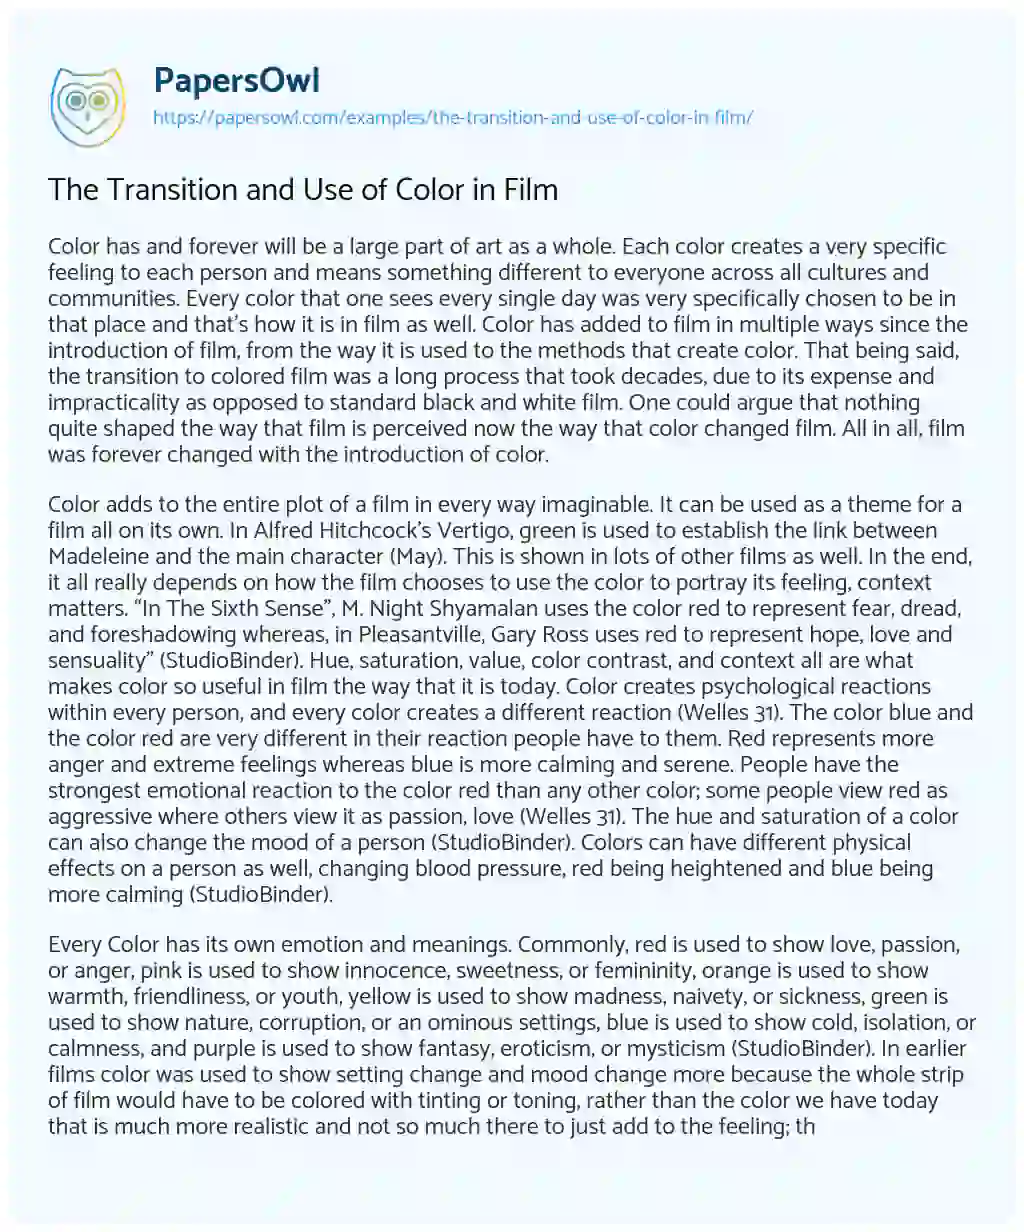 Essay on The Transition and Use of Color in Film 